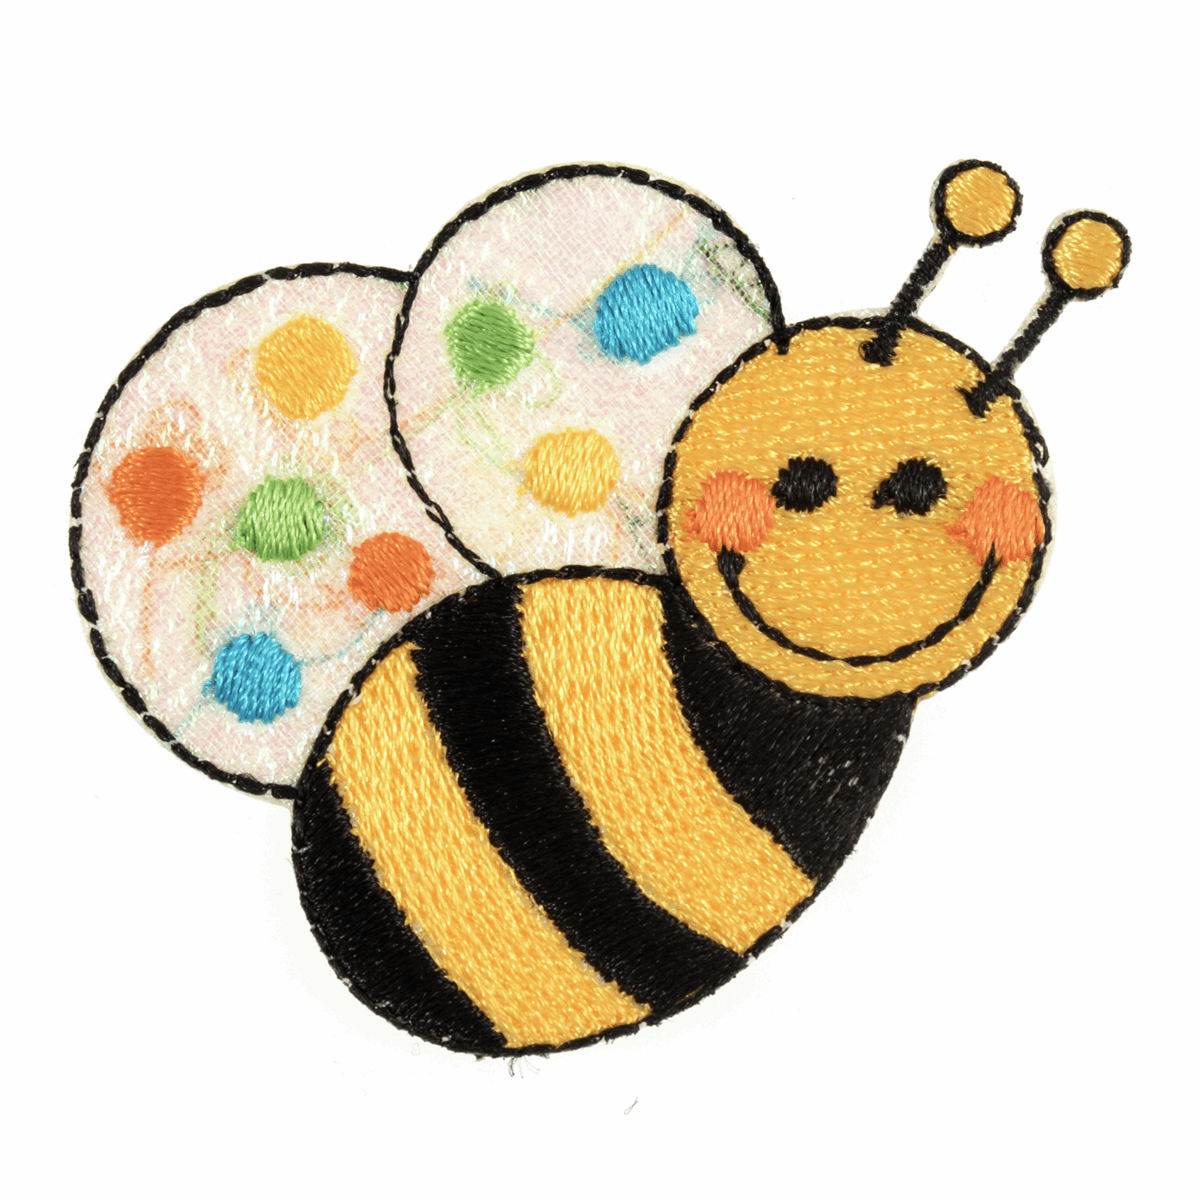 Iron-On/Sew On Motif Patch - Bumble Bee